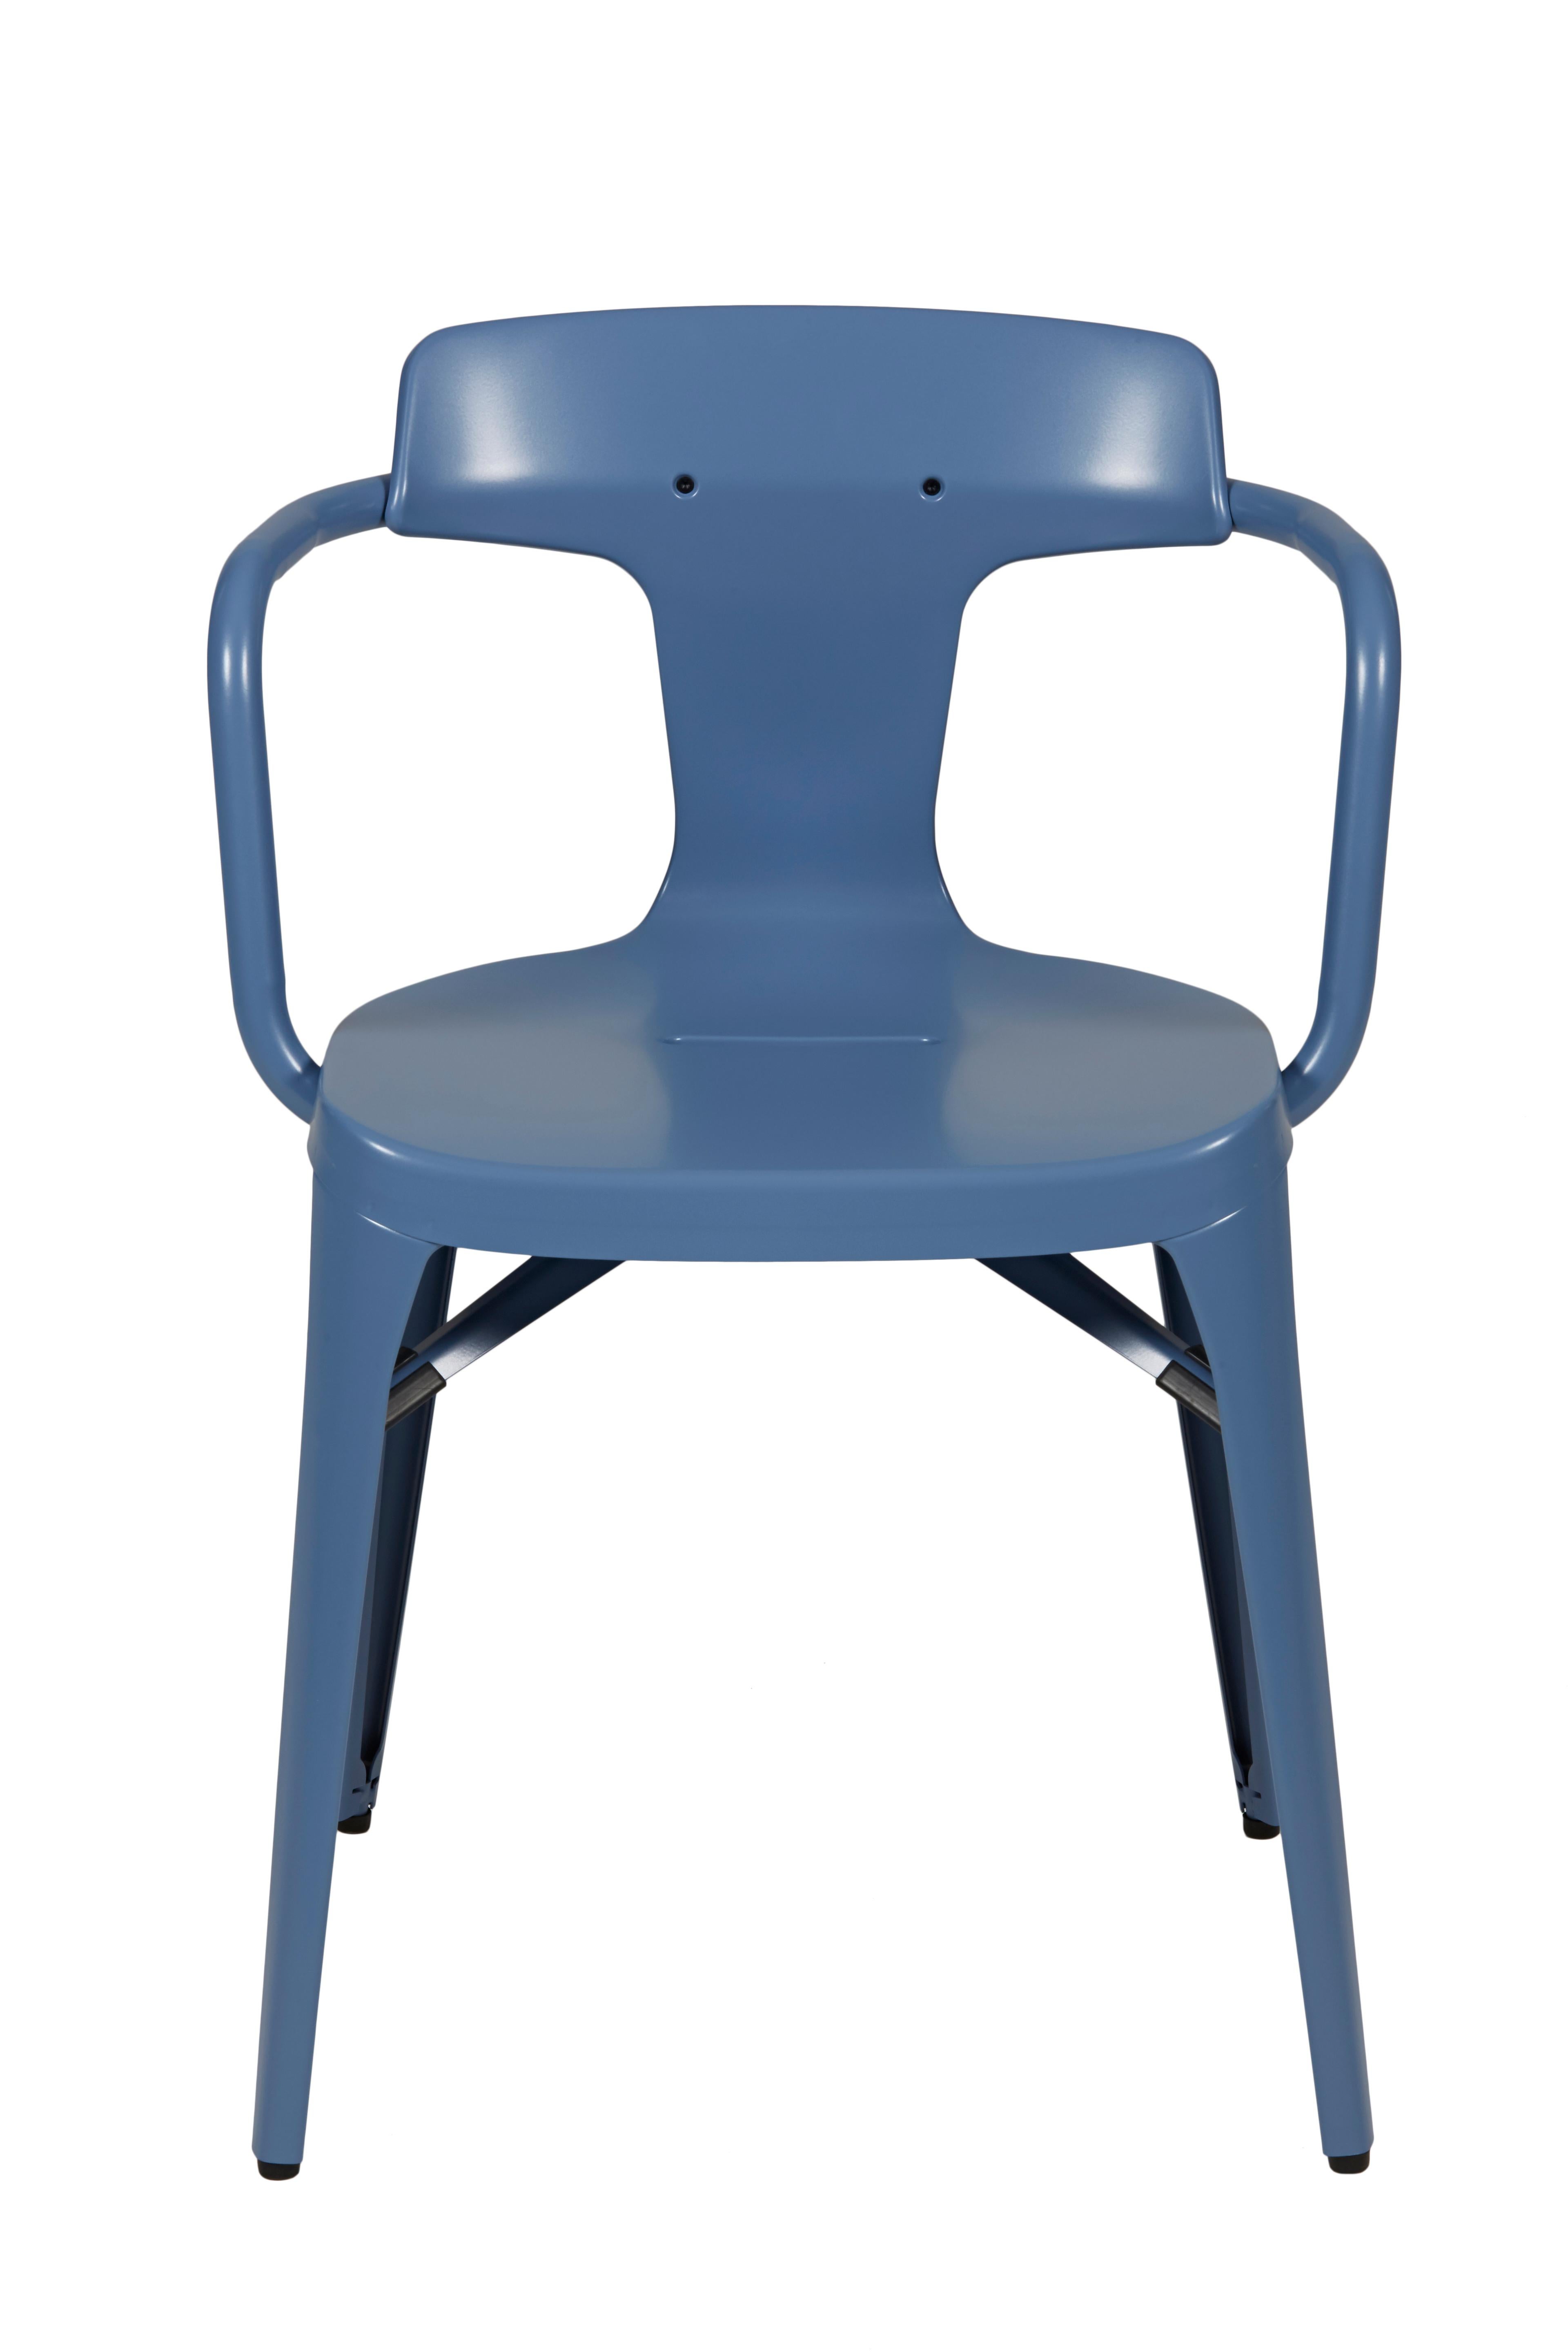 Im Angebot: T14 Chair in Pop Colors by Patrick Norguet and Tolix, Blue (Bleu Provence)